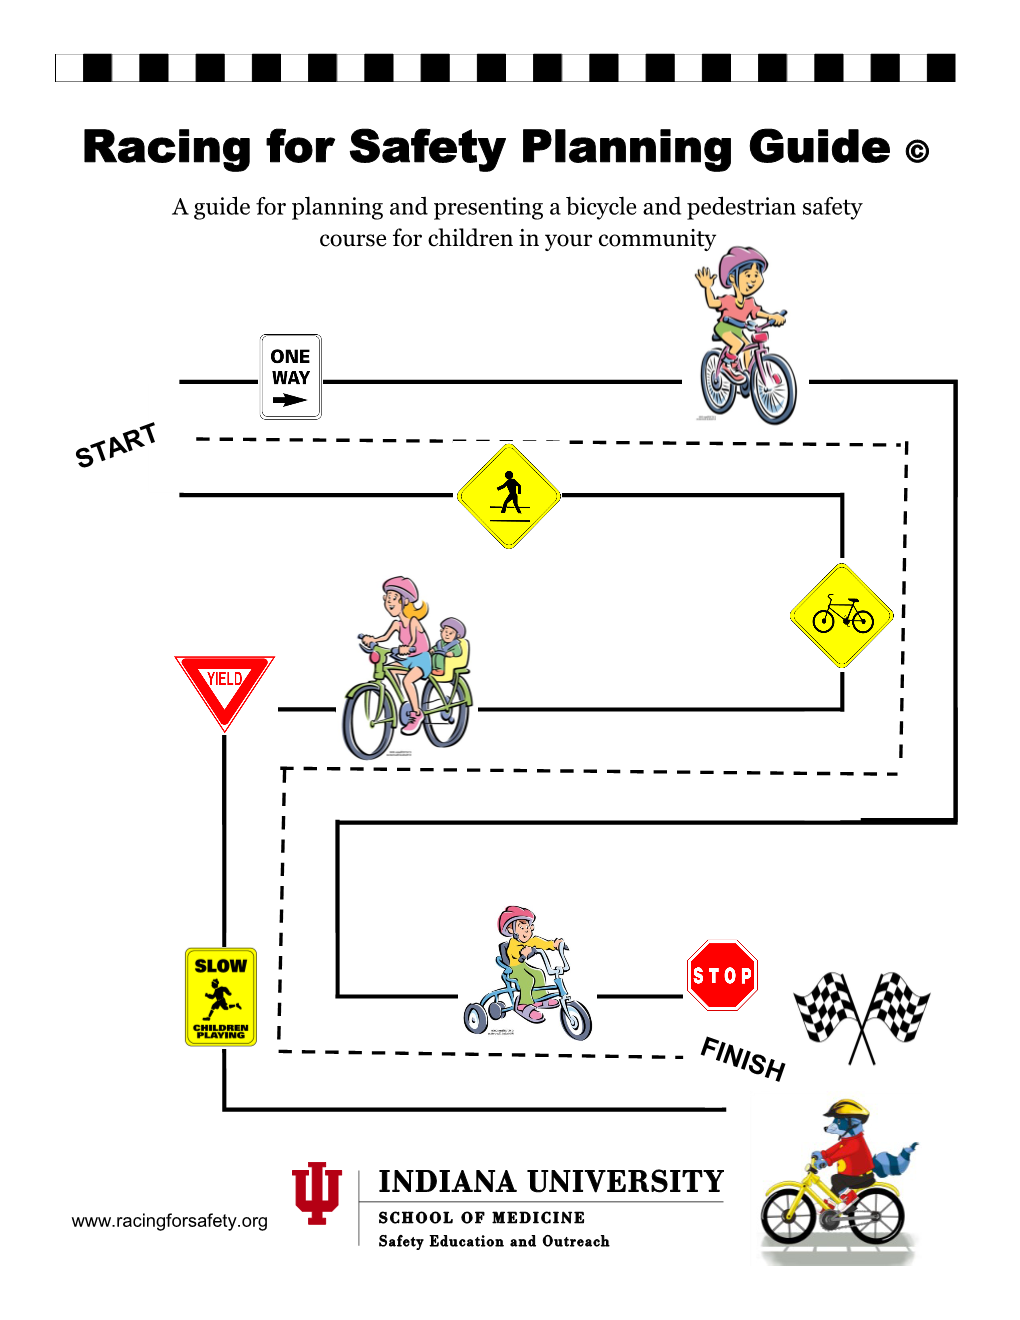 Racing for Safety Planning Guide © a Guide for Planning and Presenting a Bicycle and Pedestrian Safety Course for Children in Your Community